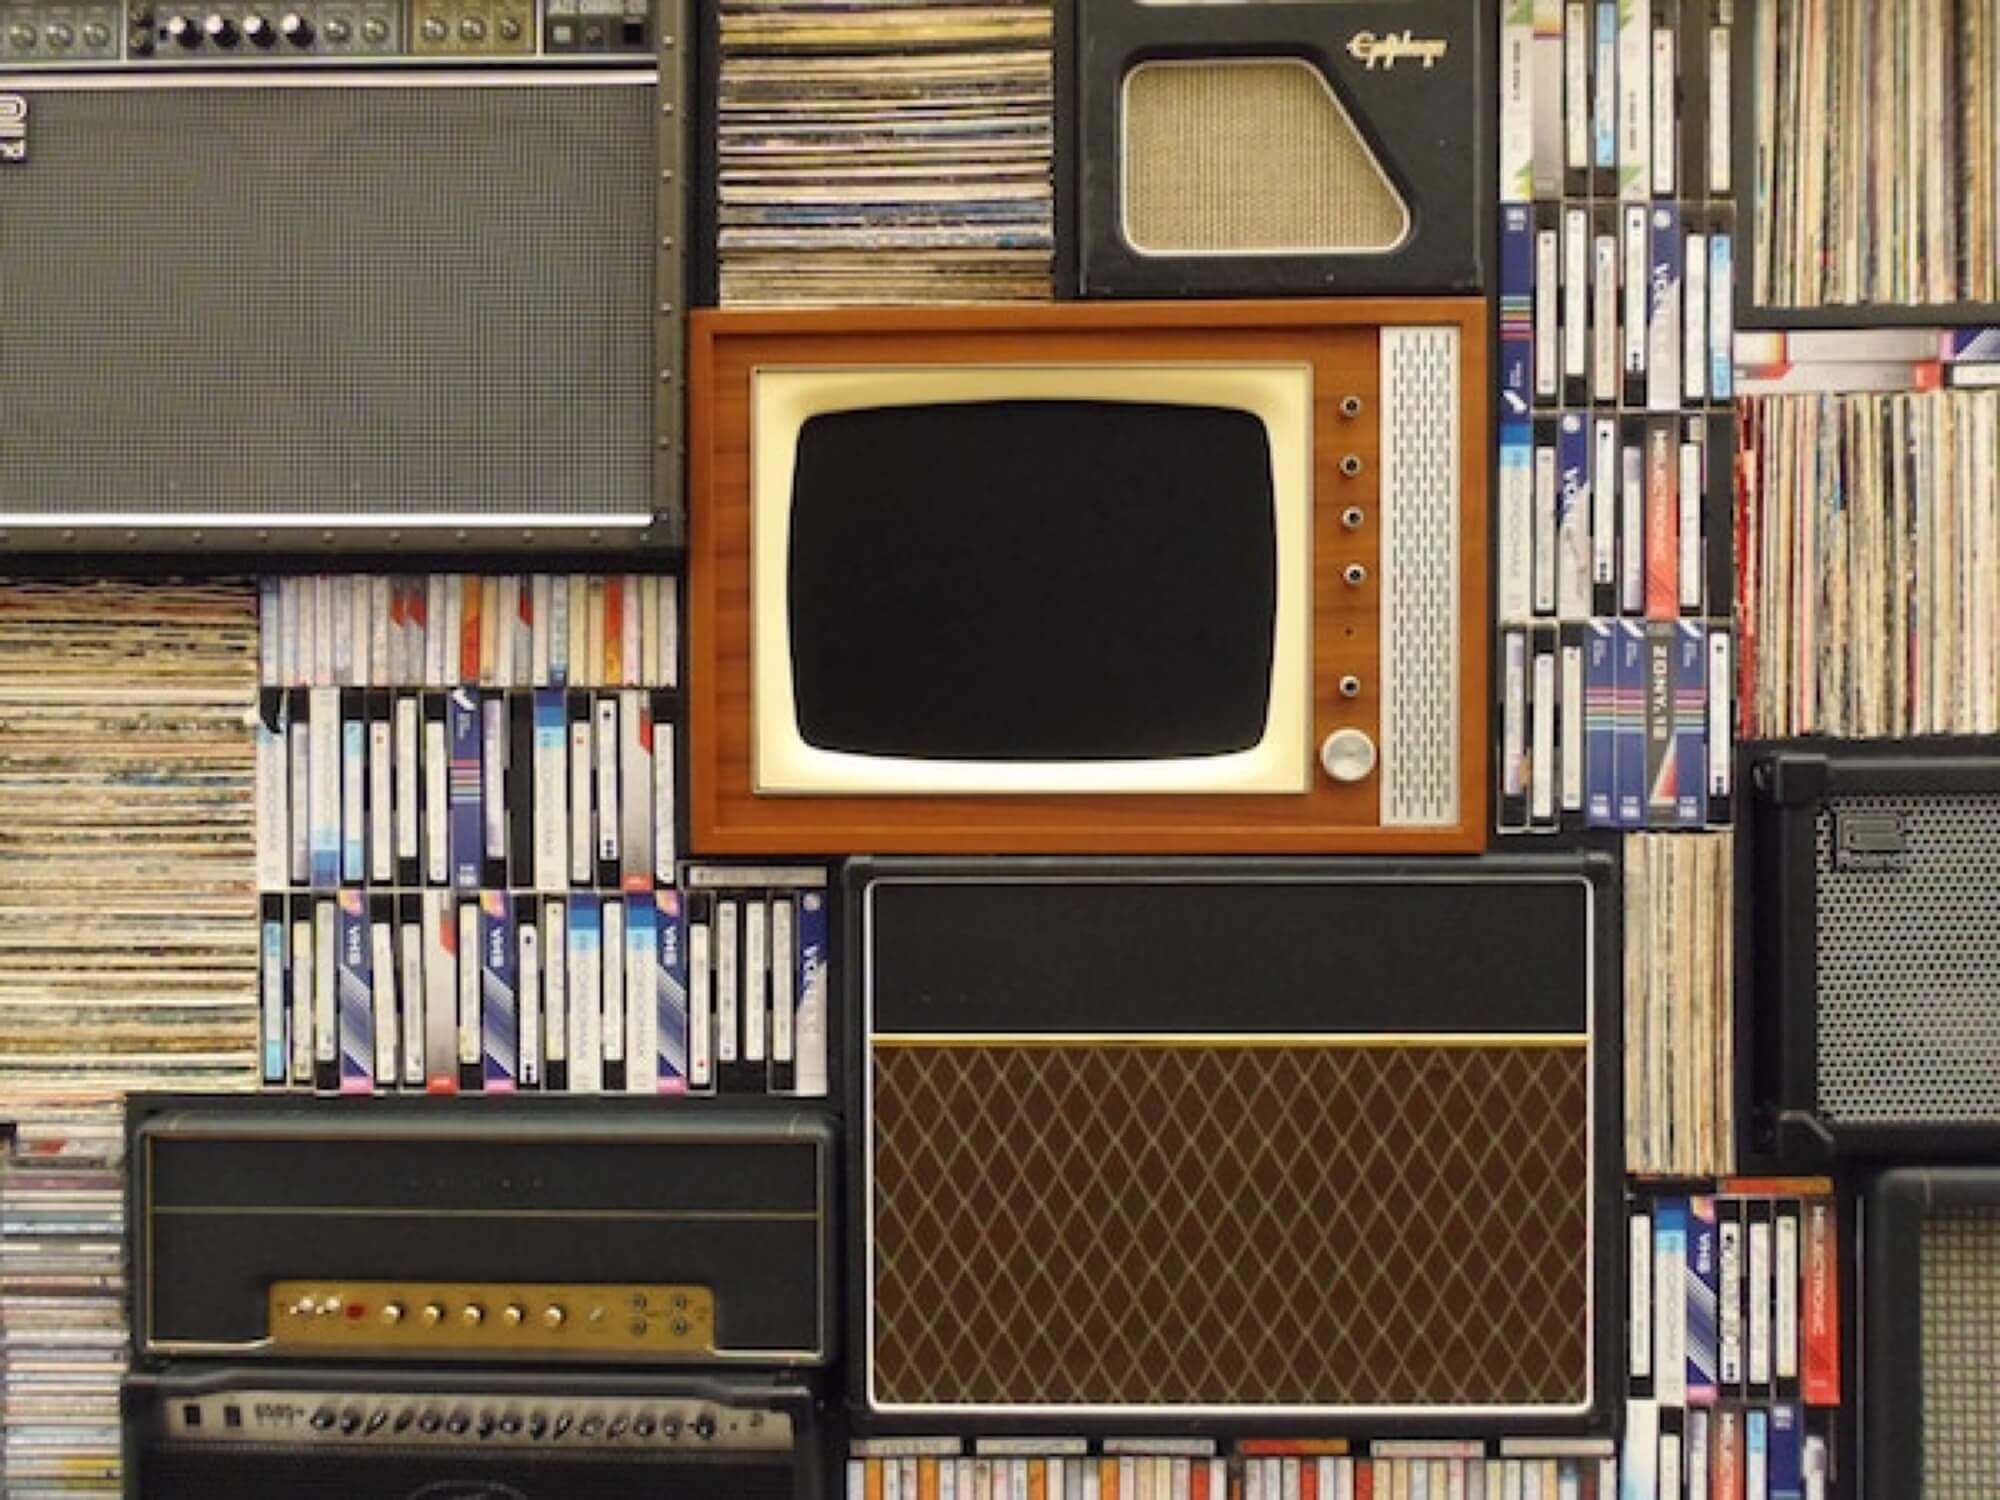 A vintage TV stacked amongst vintage speakers and tapes.